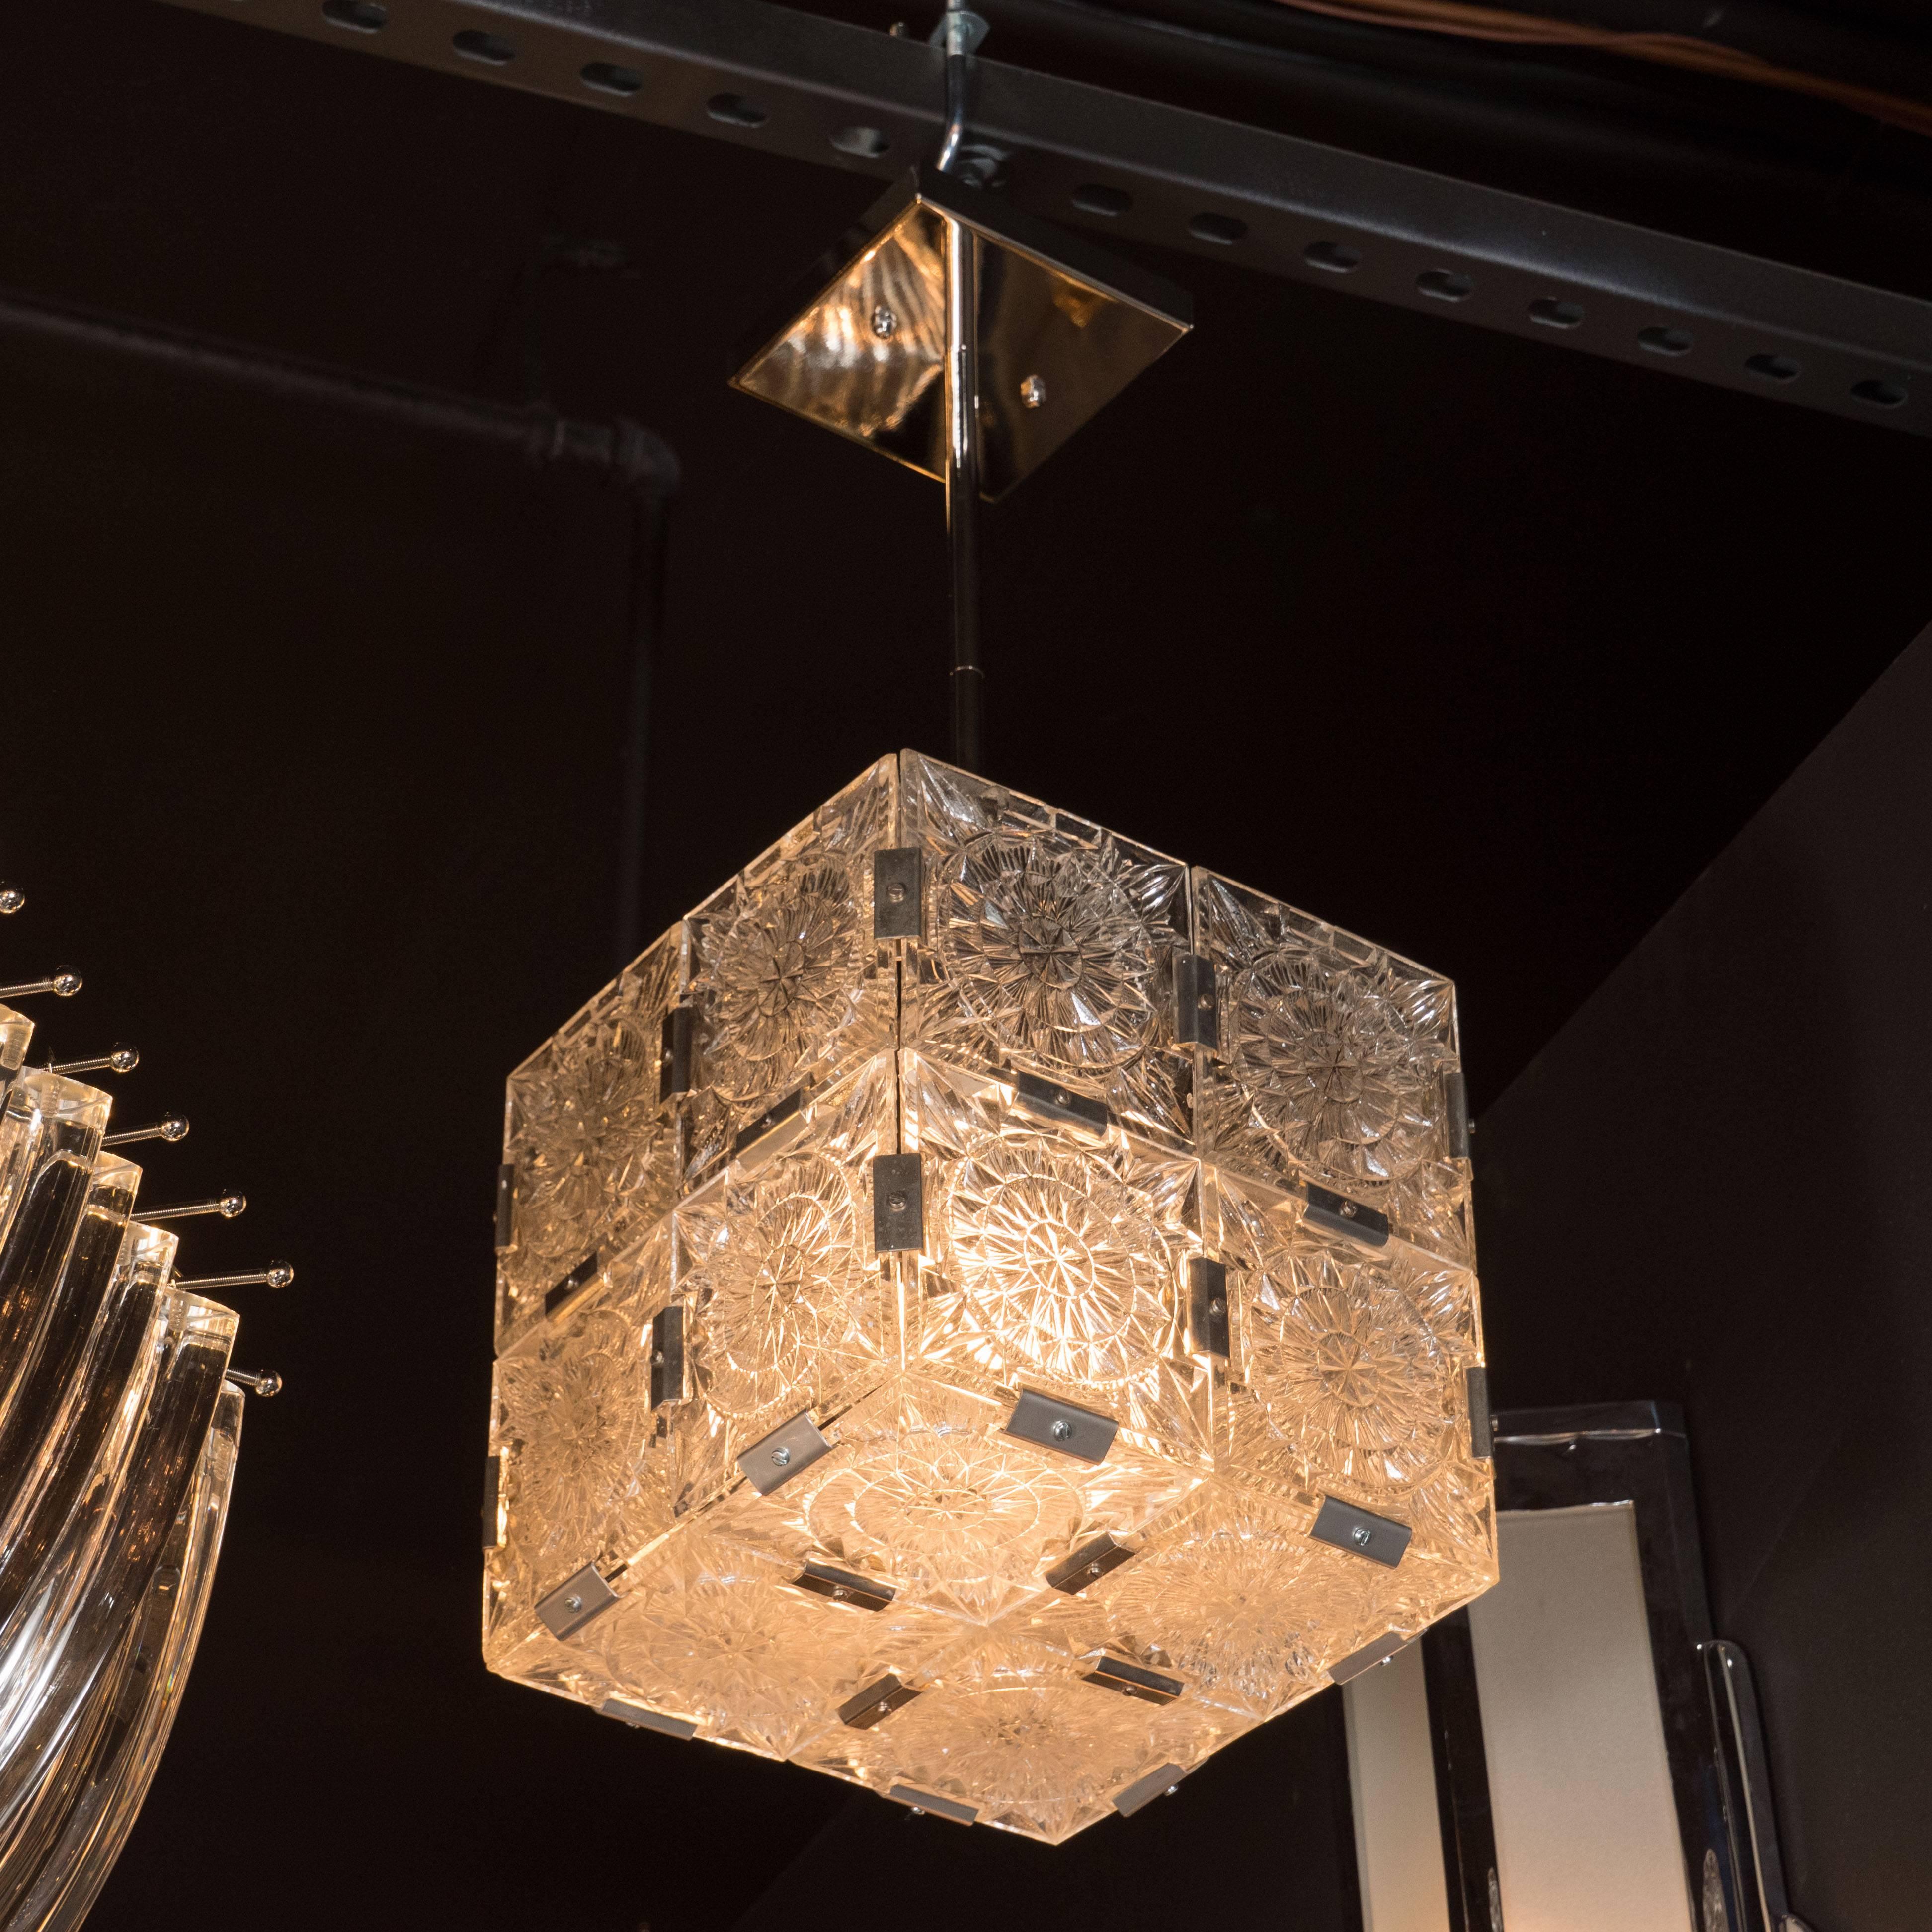 This elegant Mid-Century Modernist cube pendant was produced circa 1950 by the renowned Austrian maker Kinkeldy. Each side features four glass panels etched with an elaborate starburst pattern resembling an abstracted and illuminated woodcut print